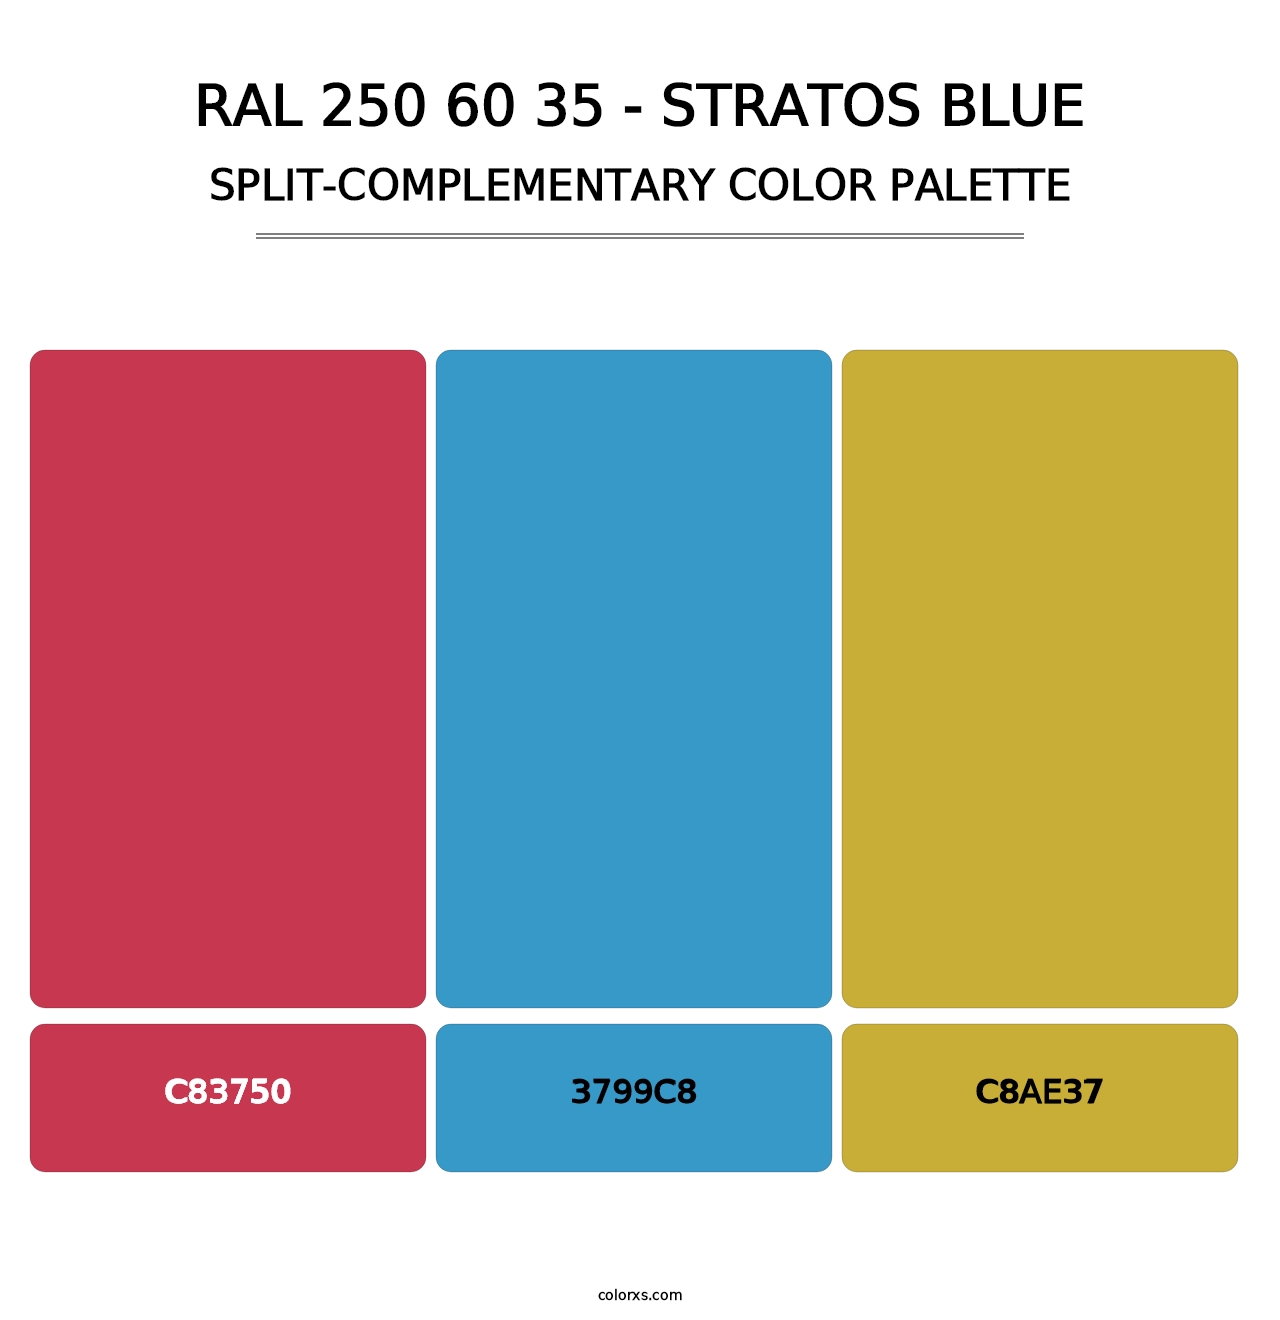 RAL 250 60 35 - Stratos Blue - Split-Complementary Color Palette